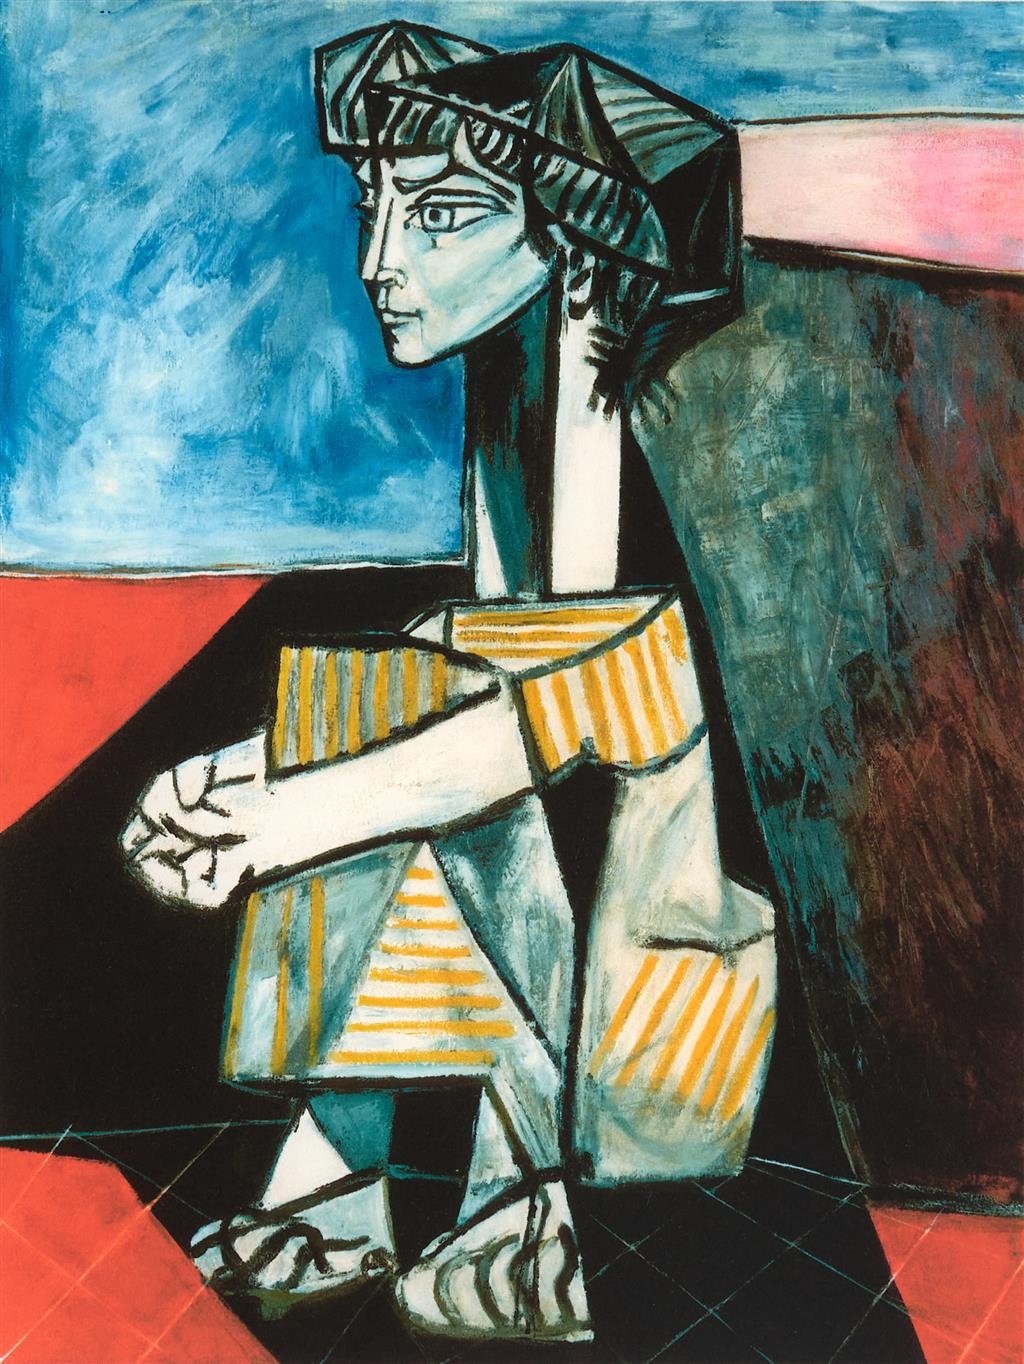 (Untitled) by Pablo Picasso